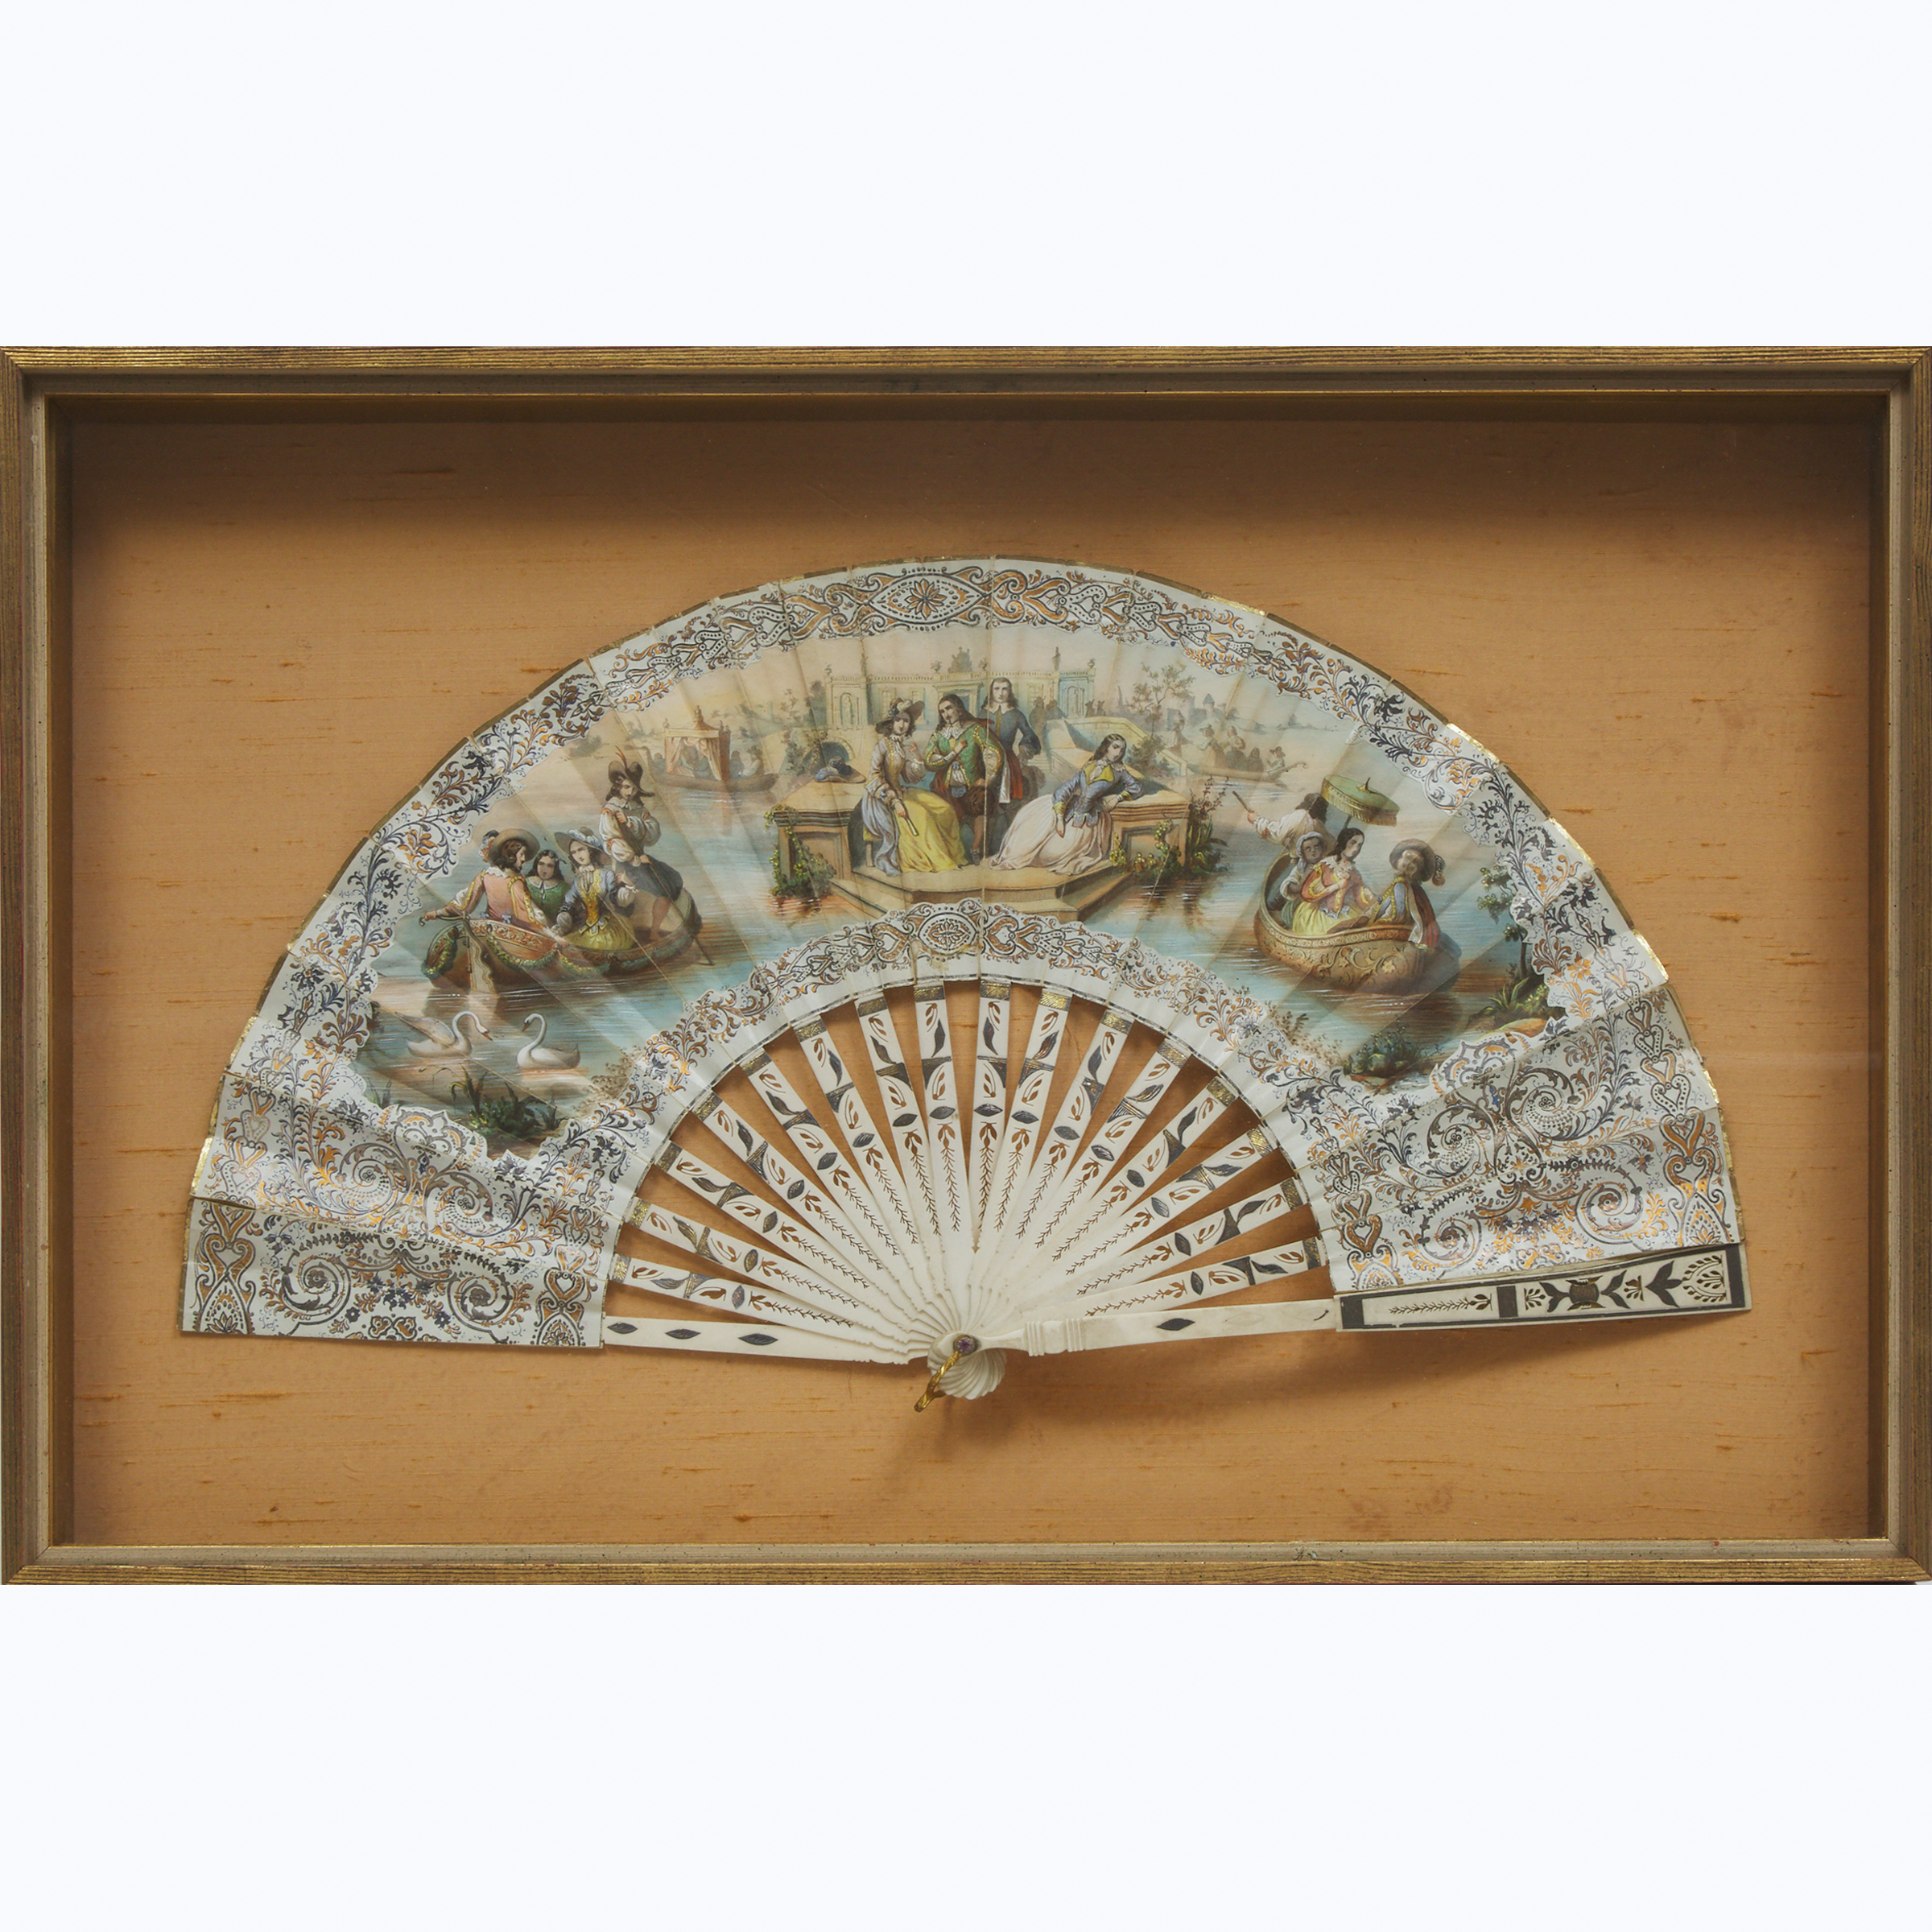 Frame Cased French Lithographed Paper Fan, late 19th/early 20th century